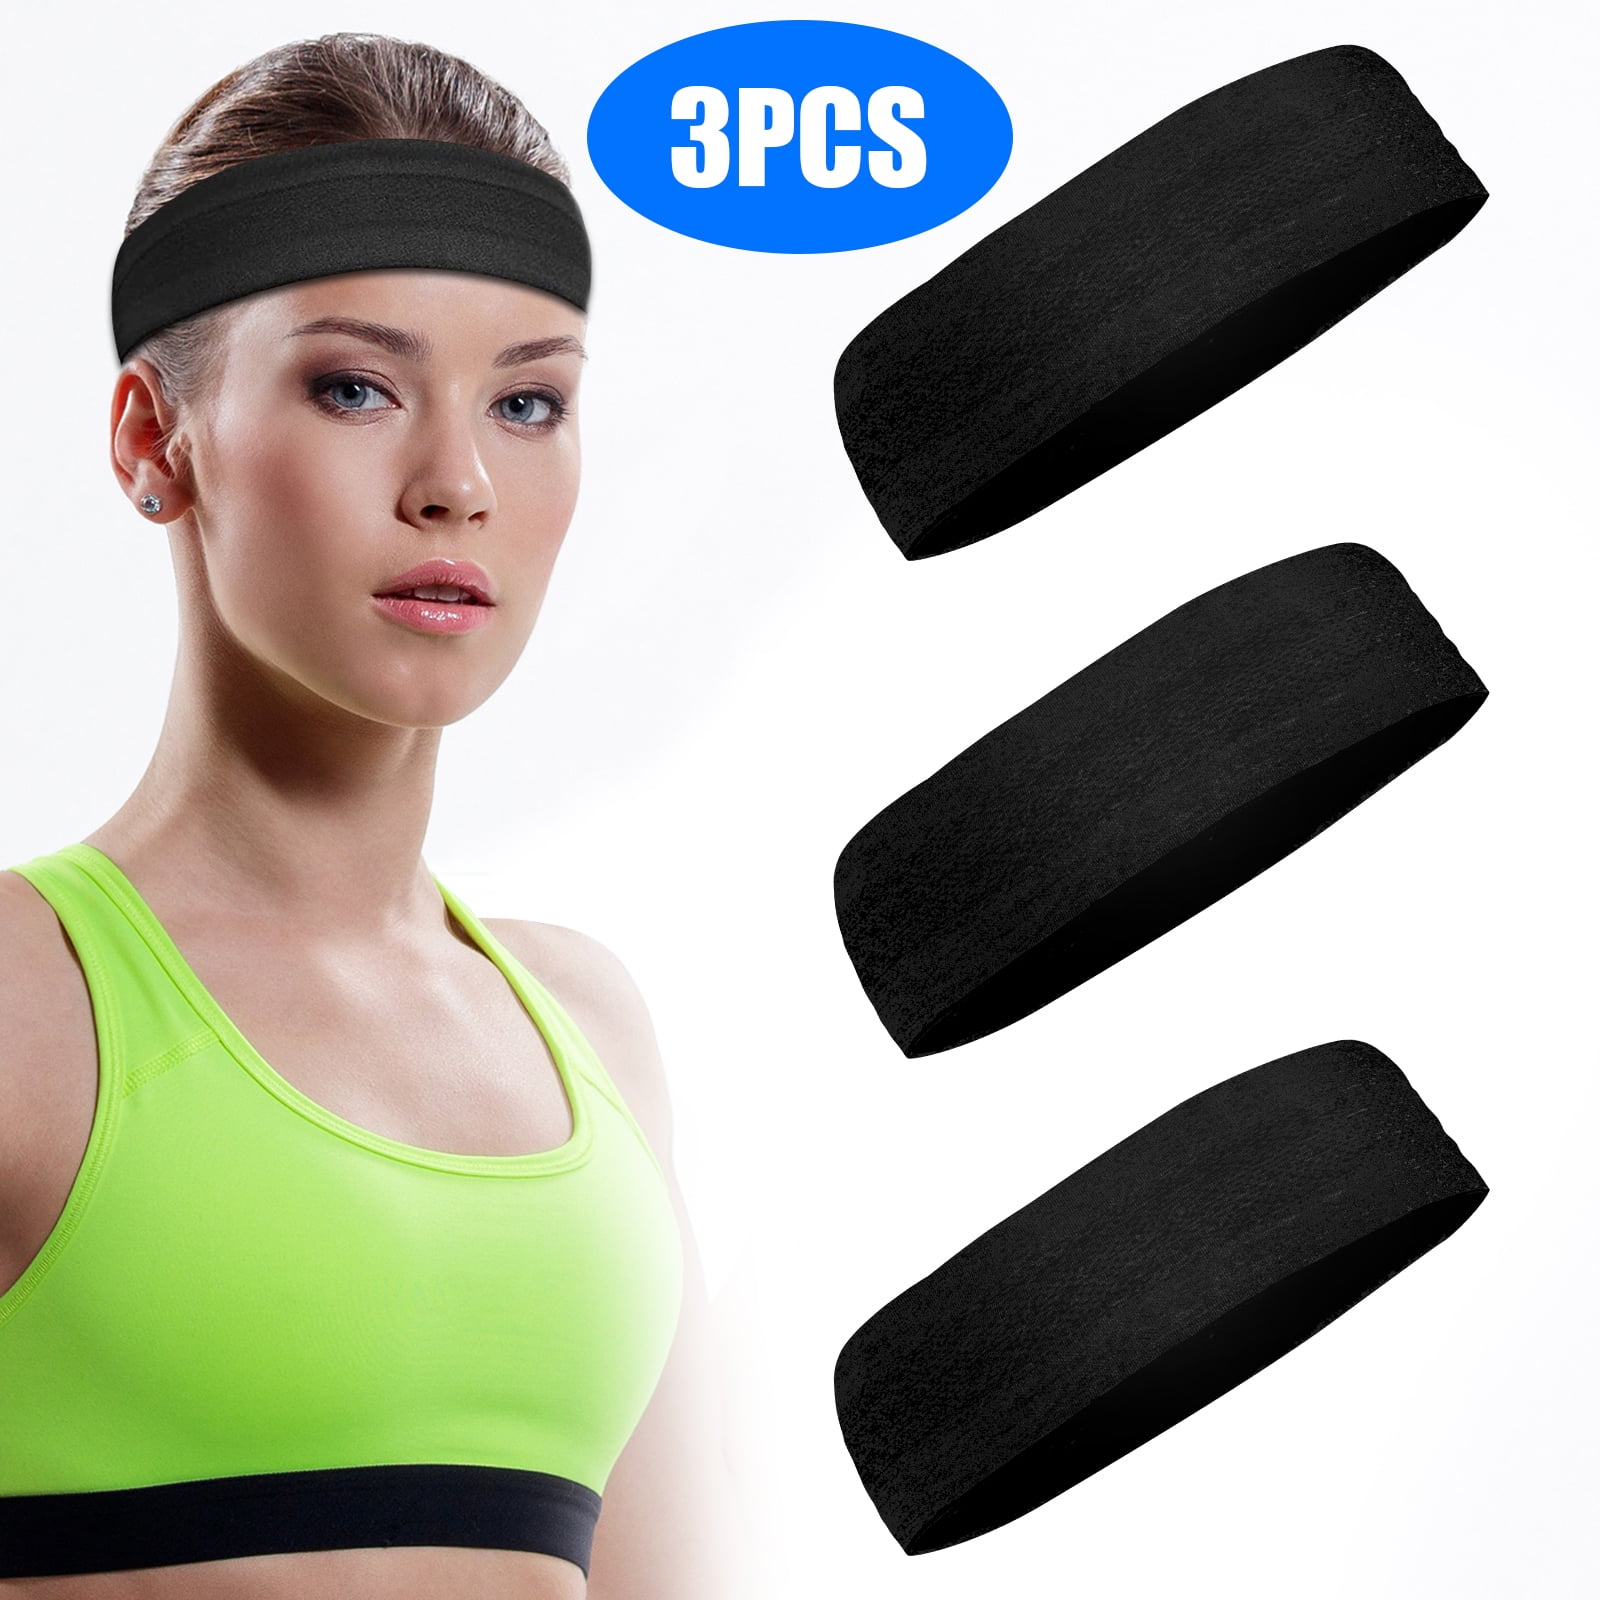 Meat Cuts Unisex Workout Sweatband for Men Moisture Wicking Hairband for Running Running Athletic Fitness DOMIKING Sports Headband for Women